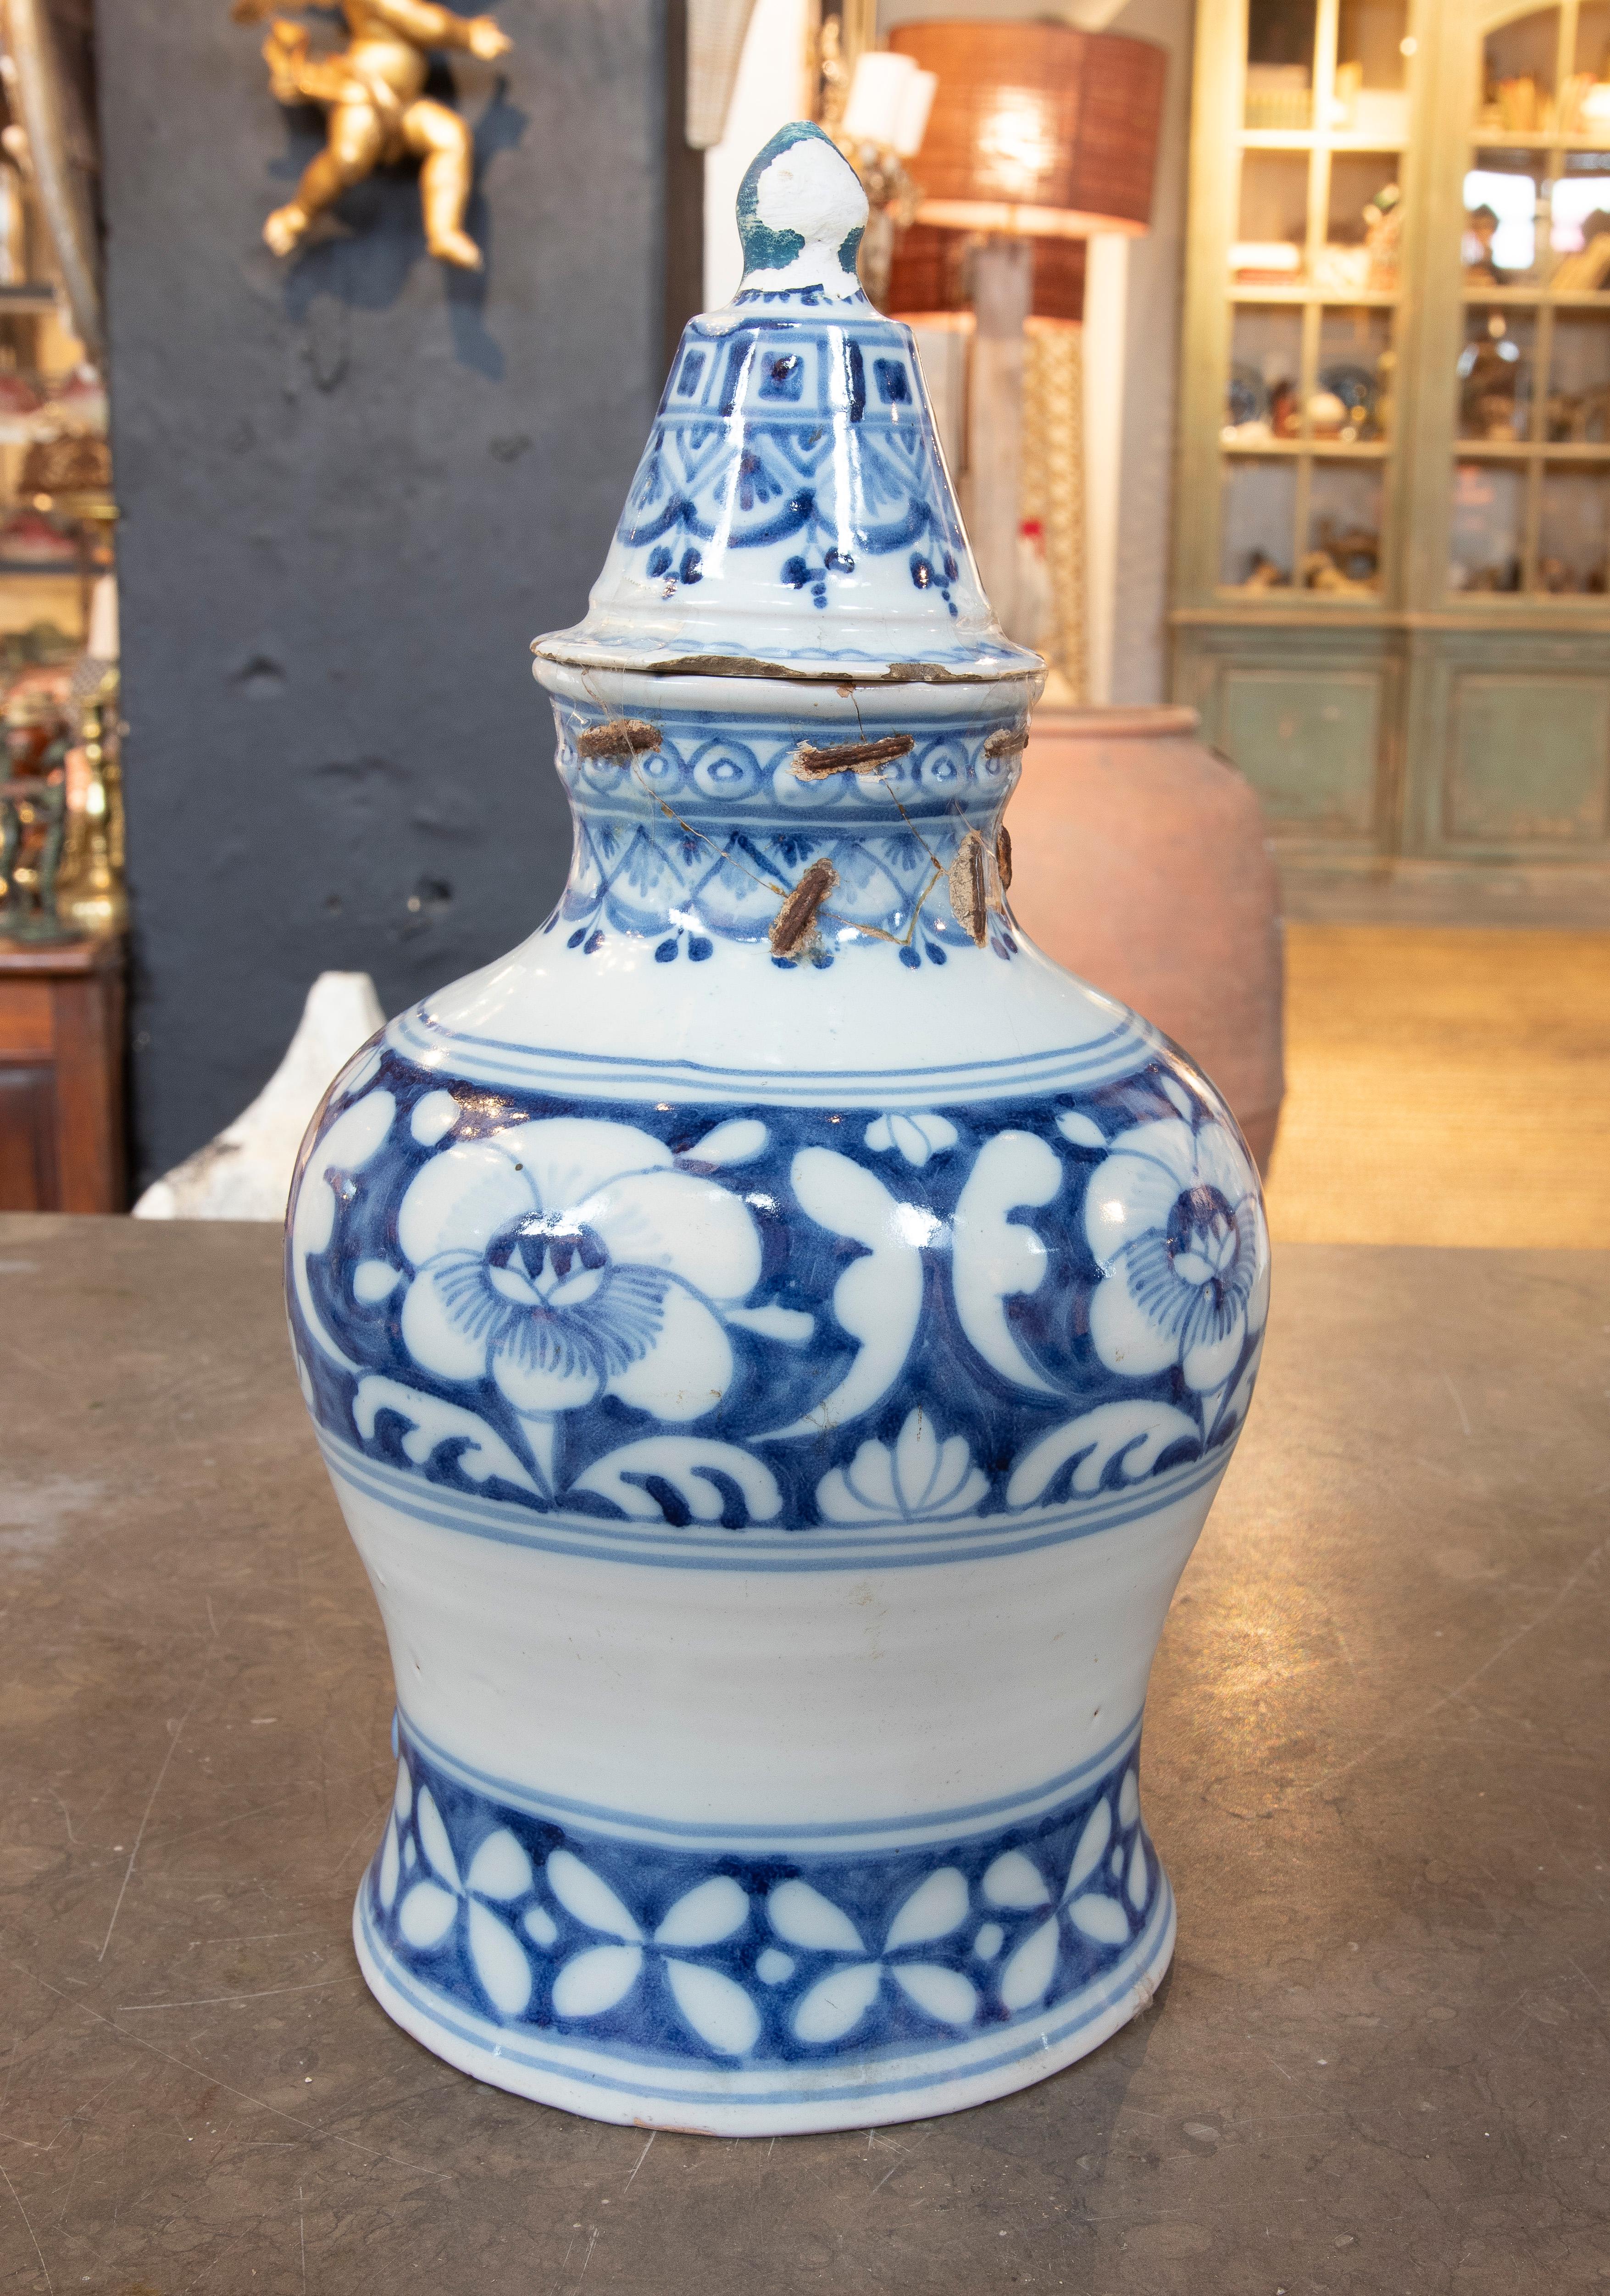 Spanish Ceramic with White Glazed Ceramic Lid with Blue Decoration For Sale 2